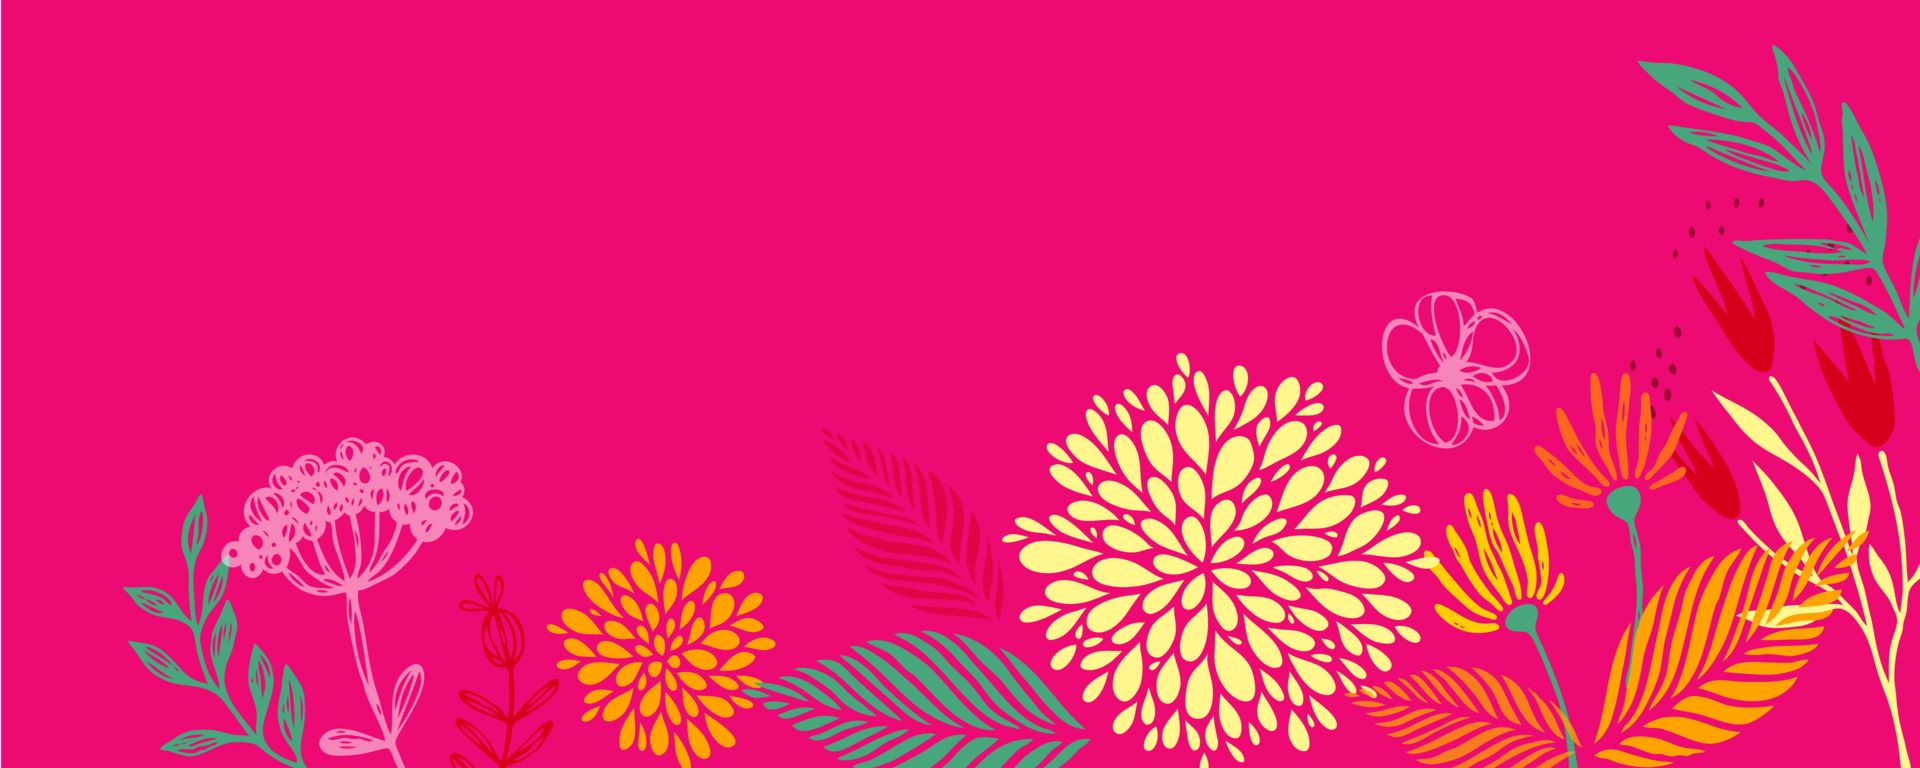 Various flower illustrations on a pink background.